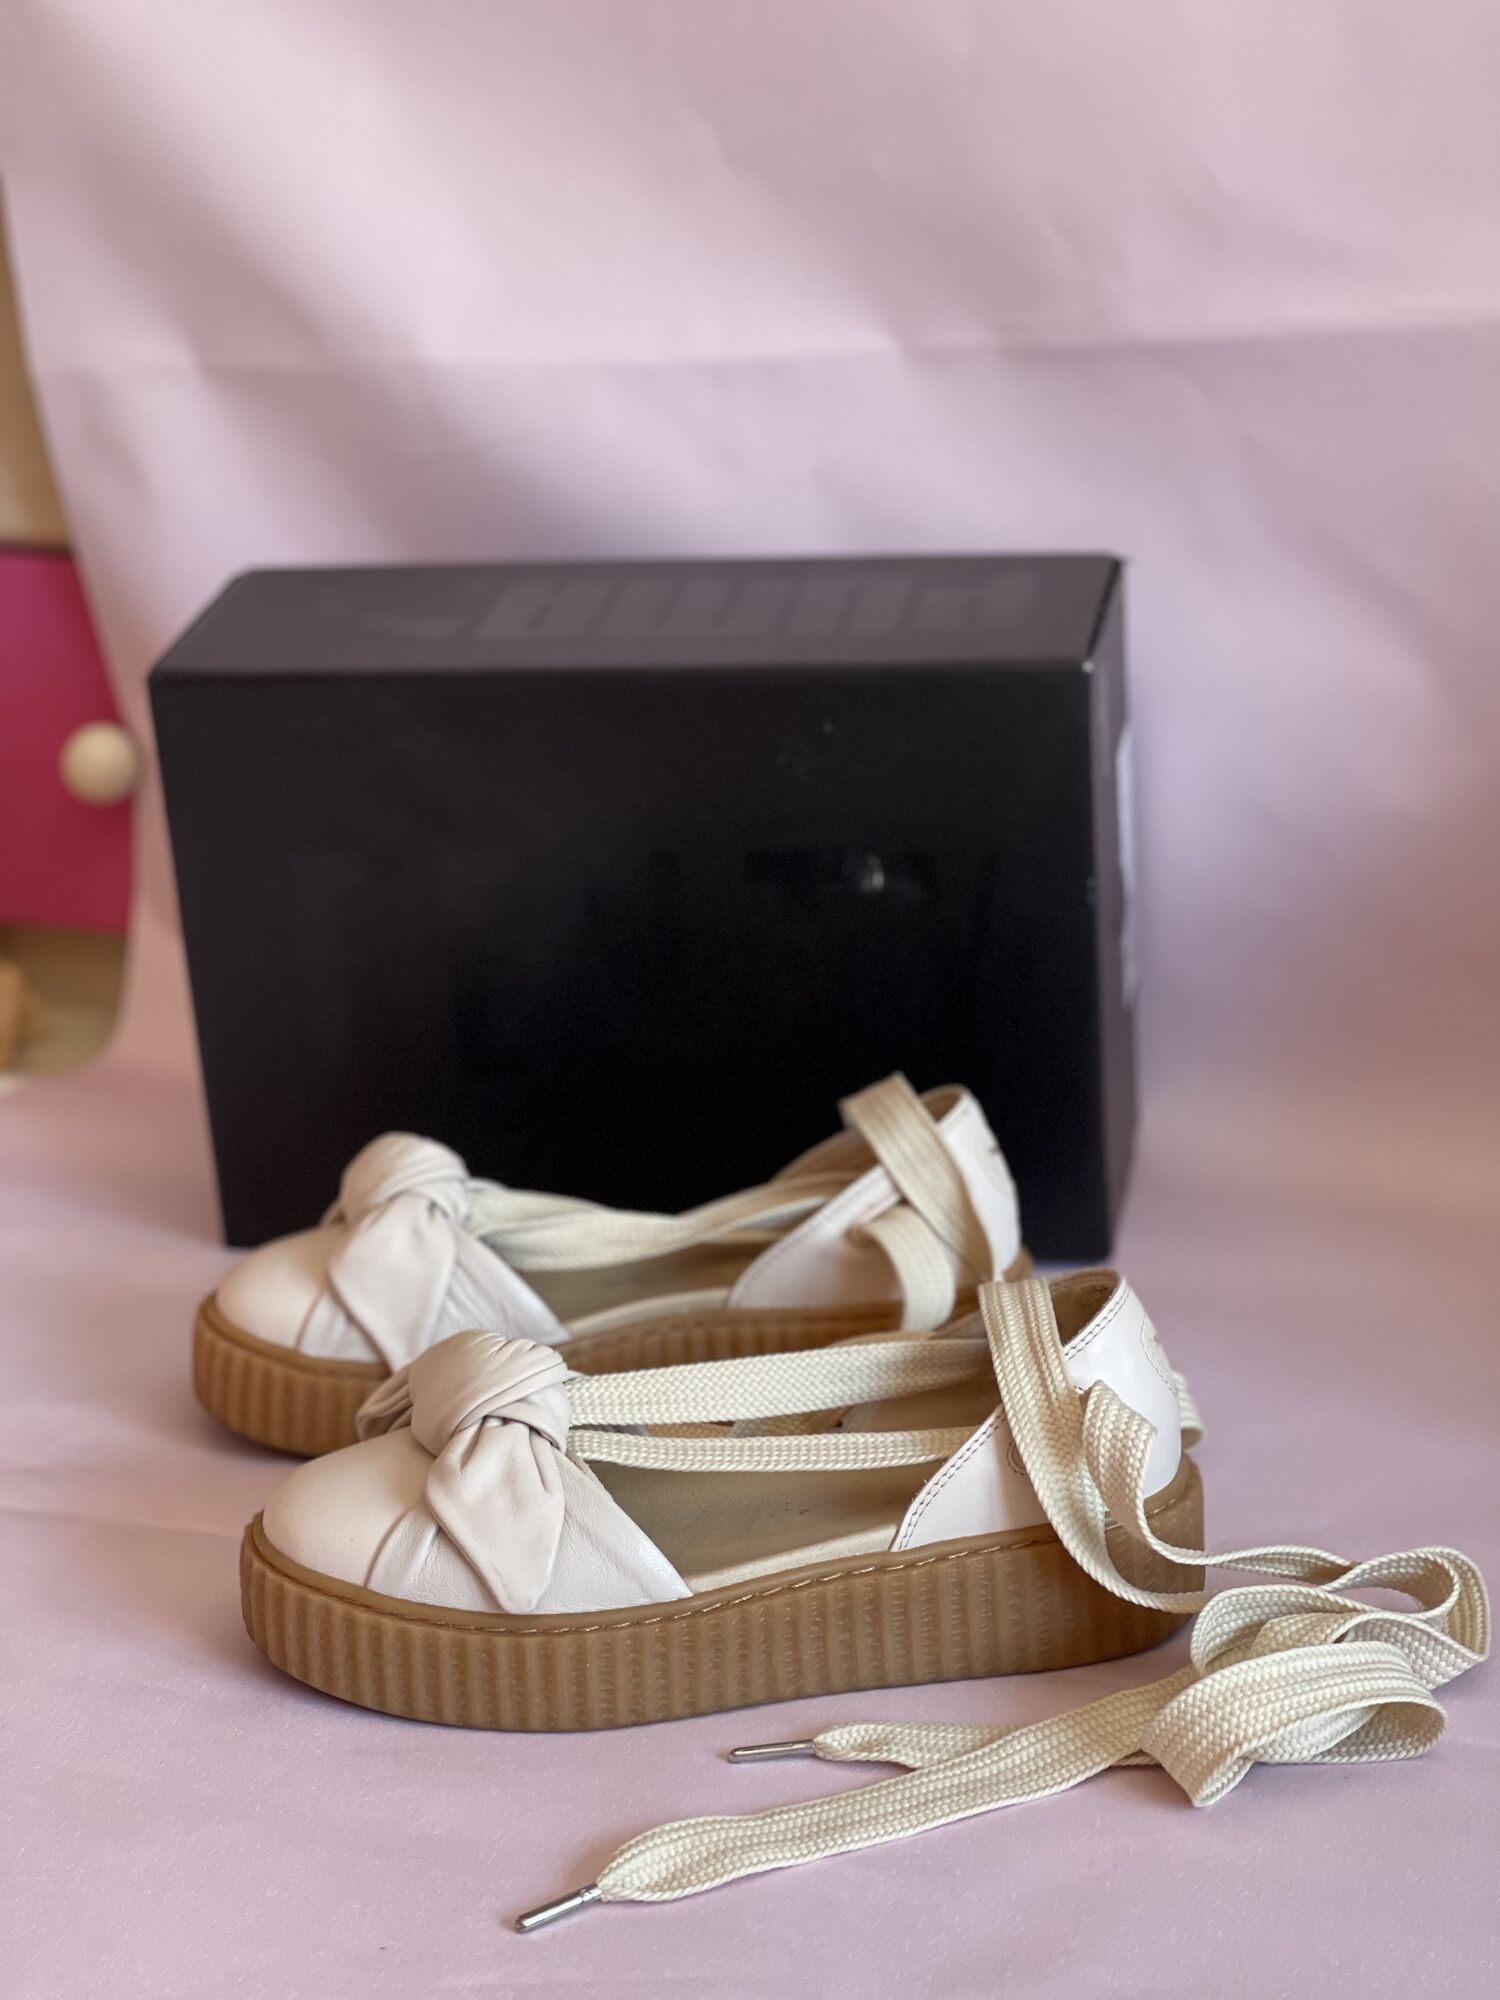 Leather Bow Creeper Espadrilles Fenty x Puma - IT 37.5, buy pre-owned at